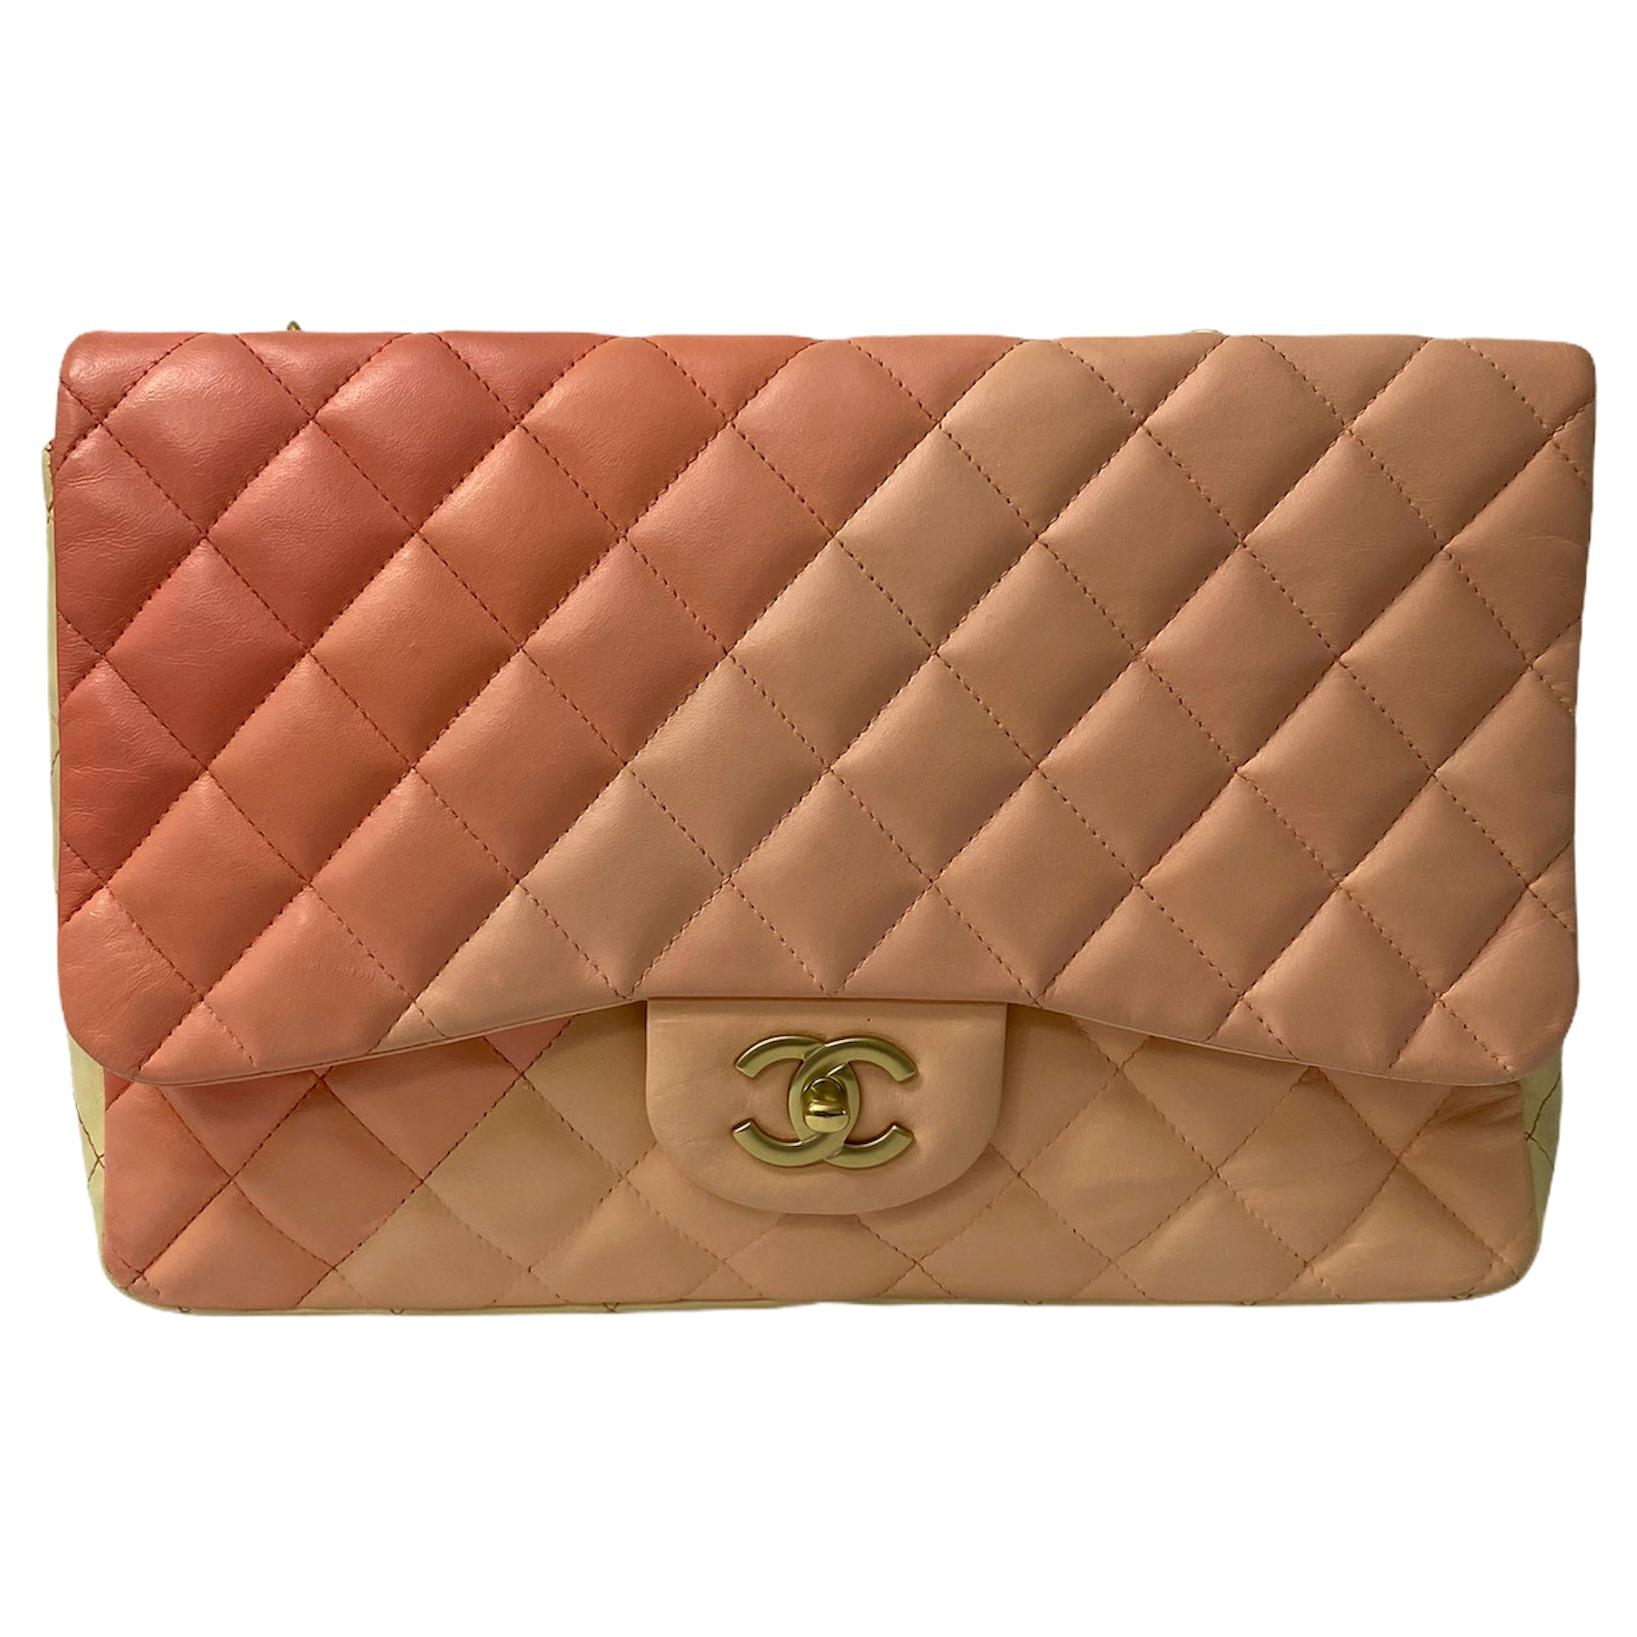 Chanel Pink and Beige Leather Jumbo Limited Edition Bag 